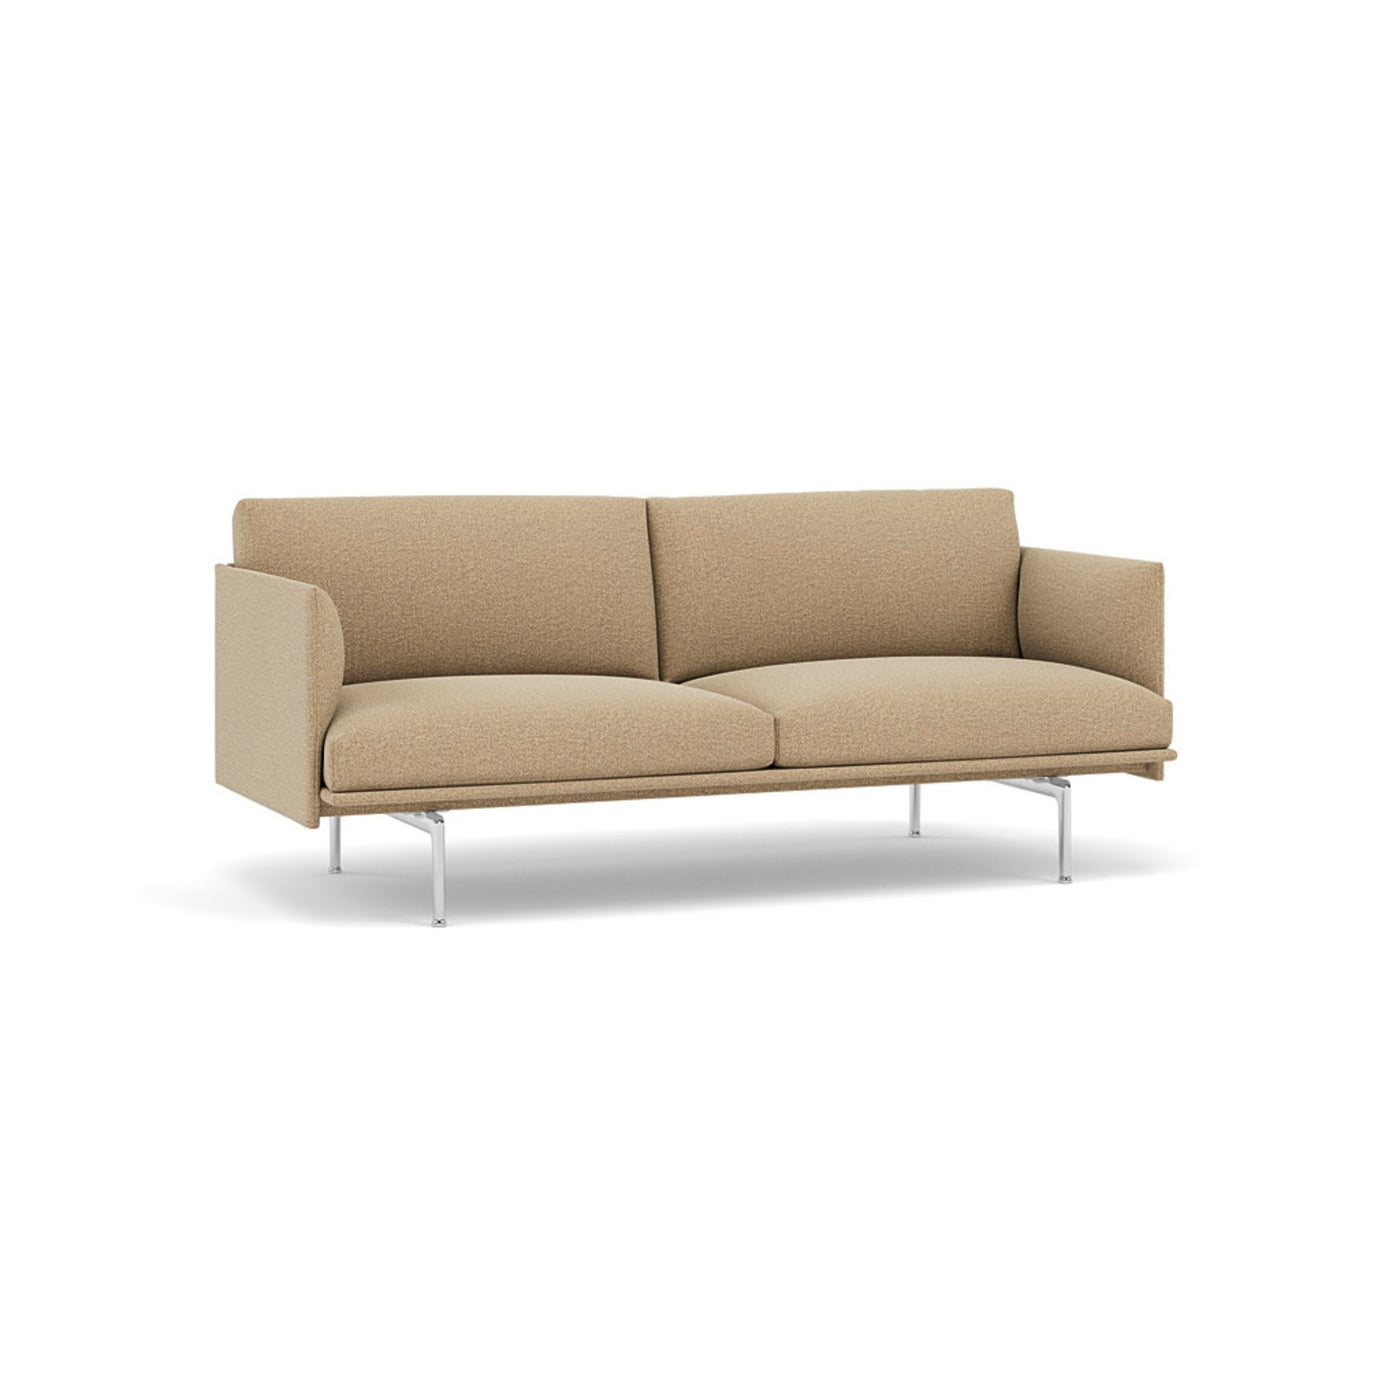 Muuto Outline Studio Sofa. Made to order from someday designs. #colour_ecriture-240